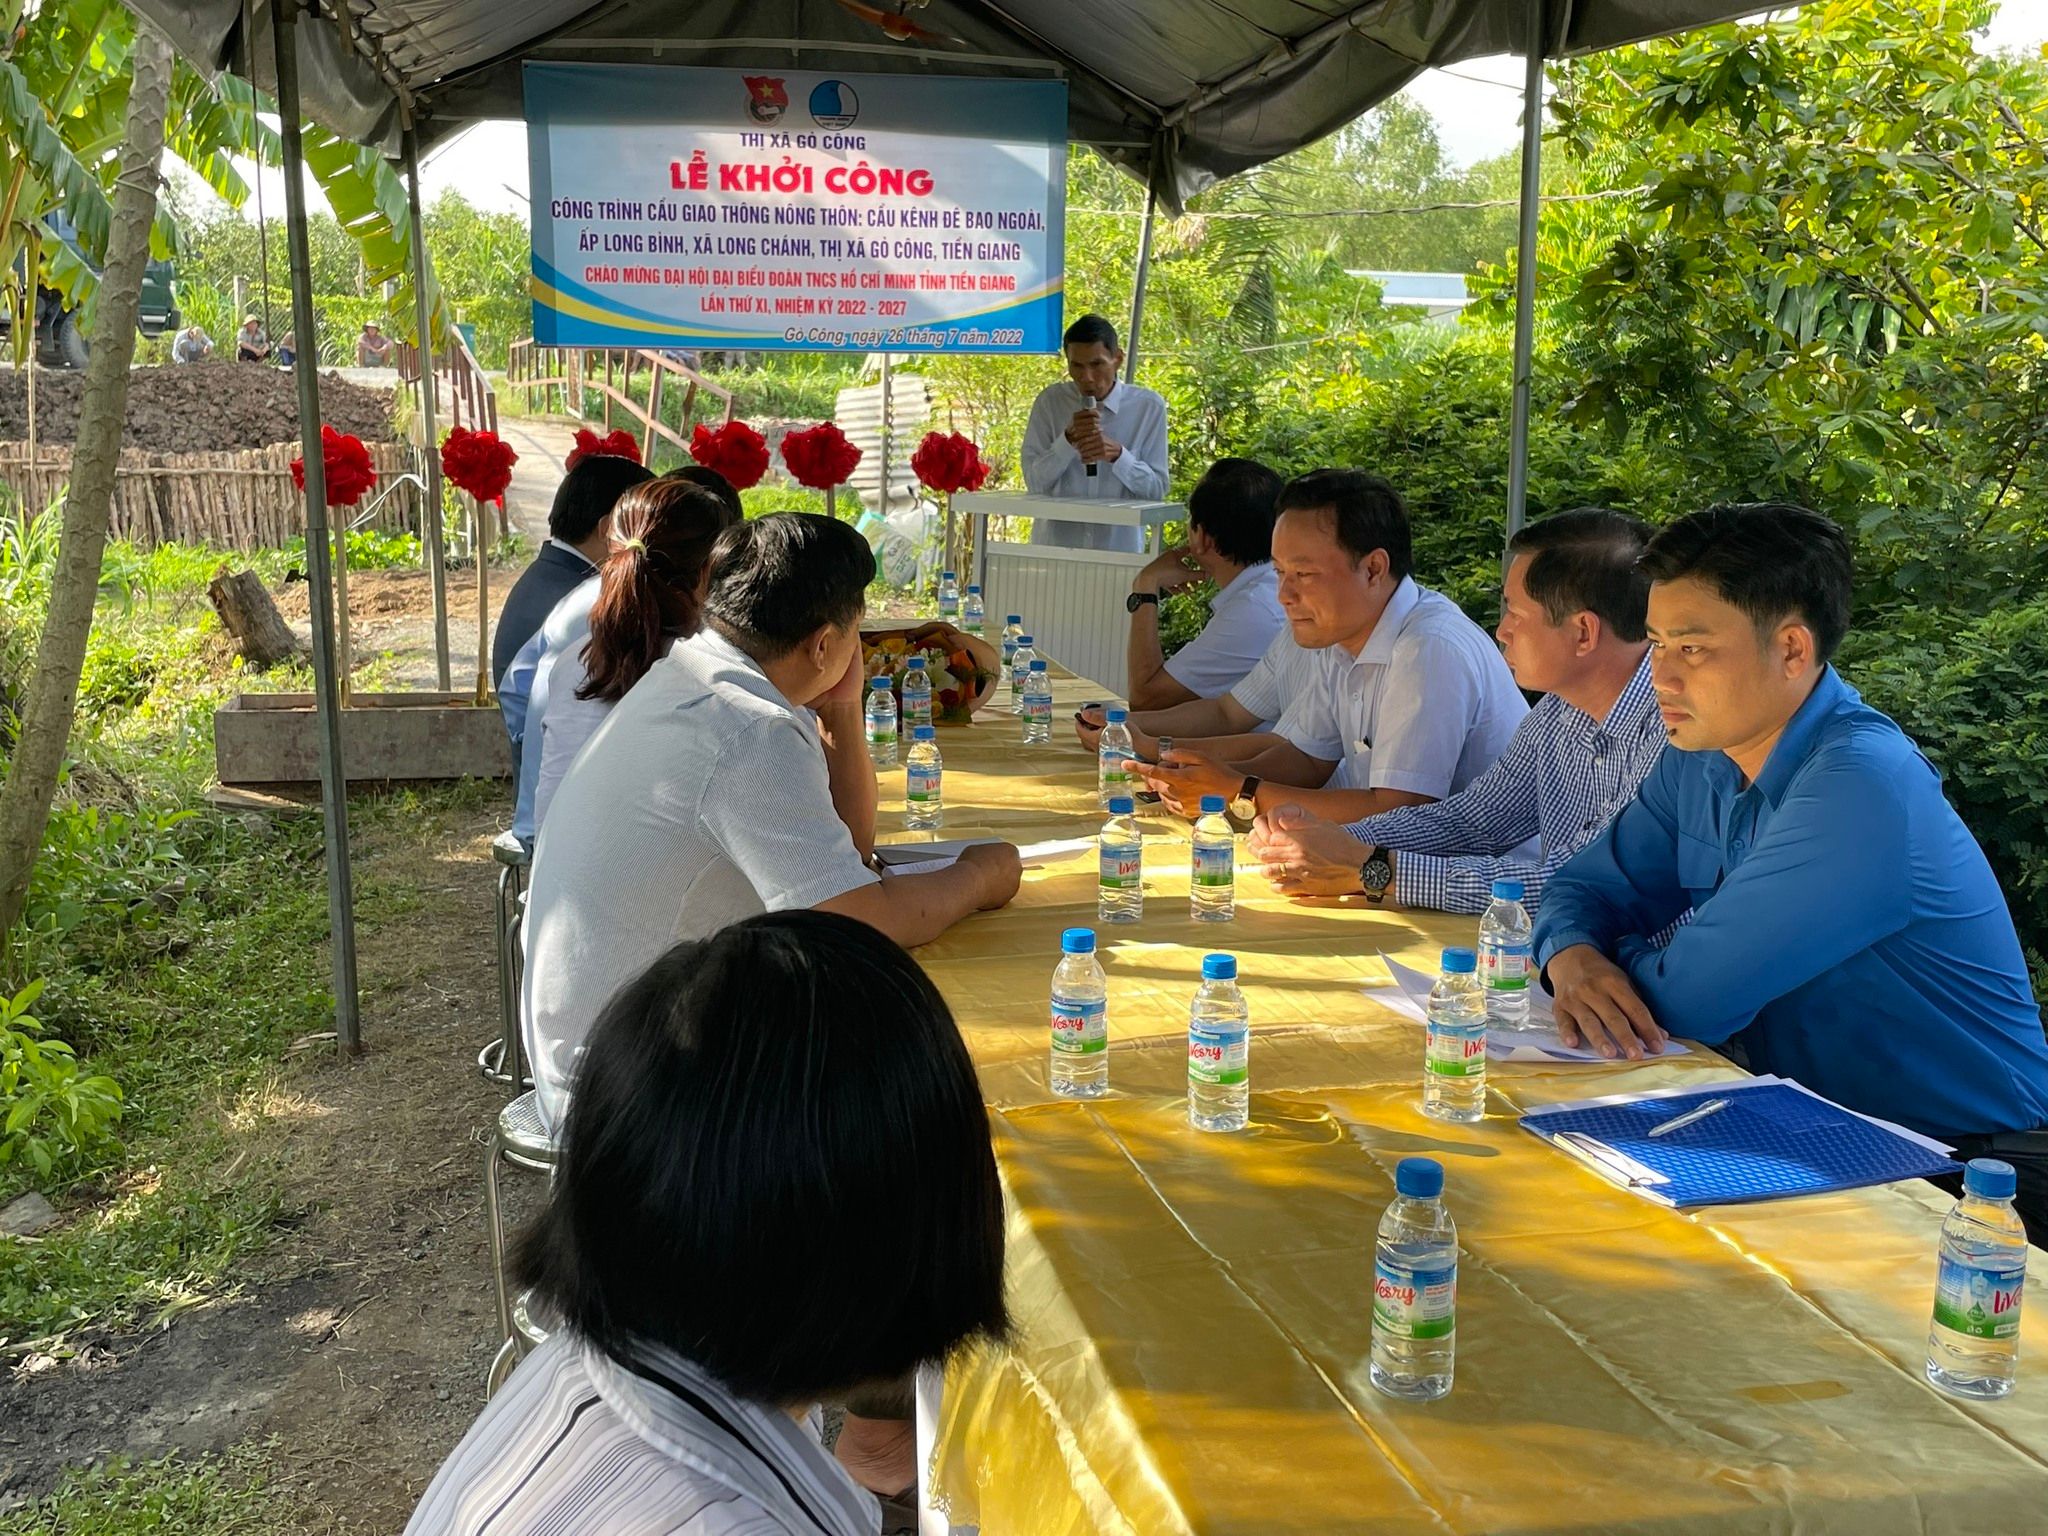 go cong town  organizing the groundbreaking ceremony for the construction of rural traffic bridge in long chanh commune